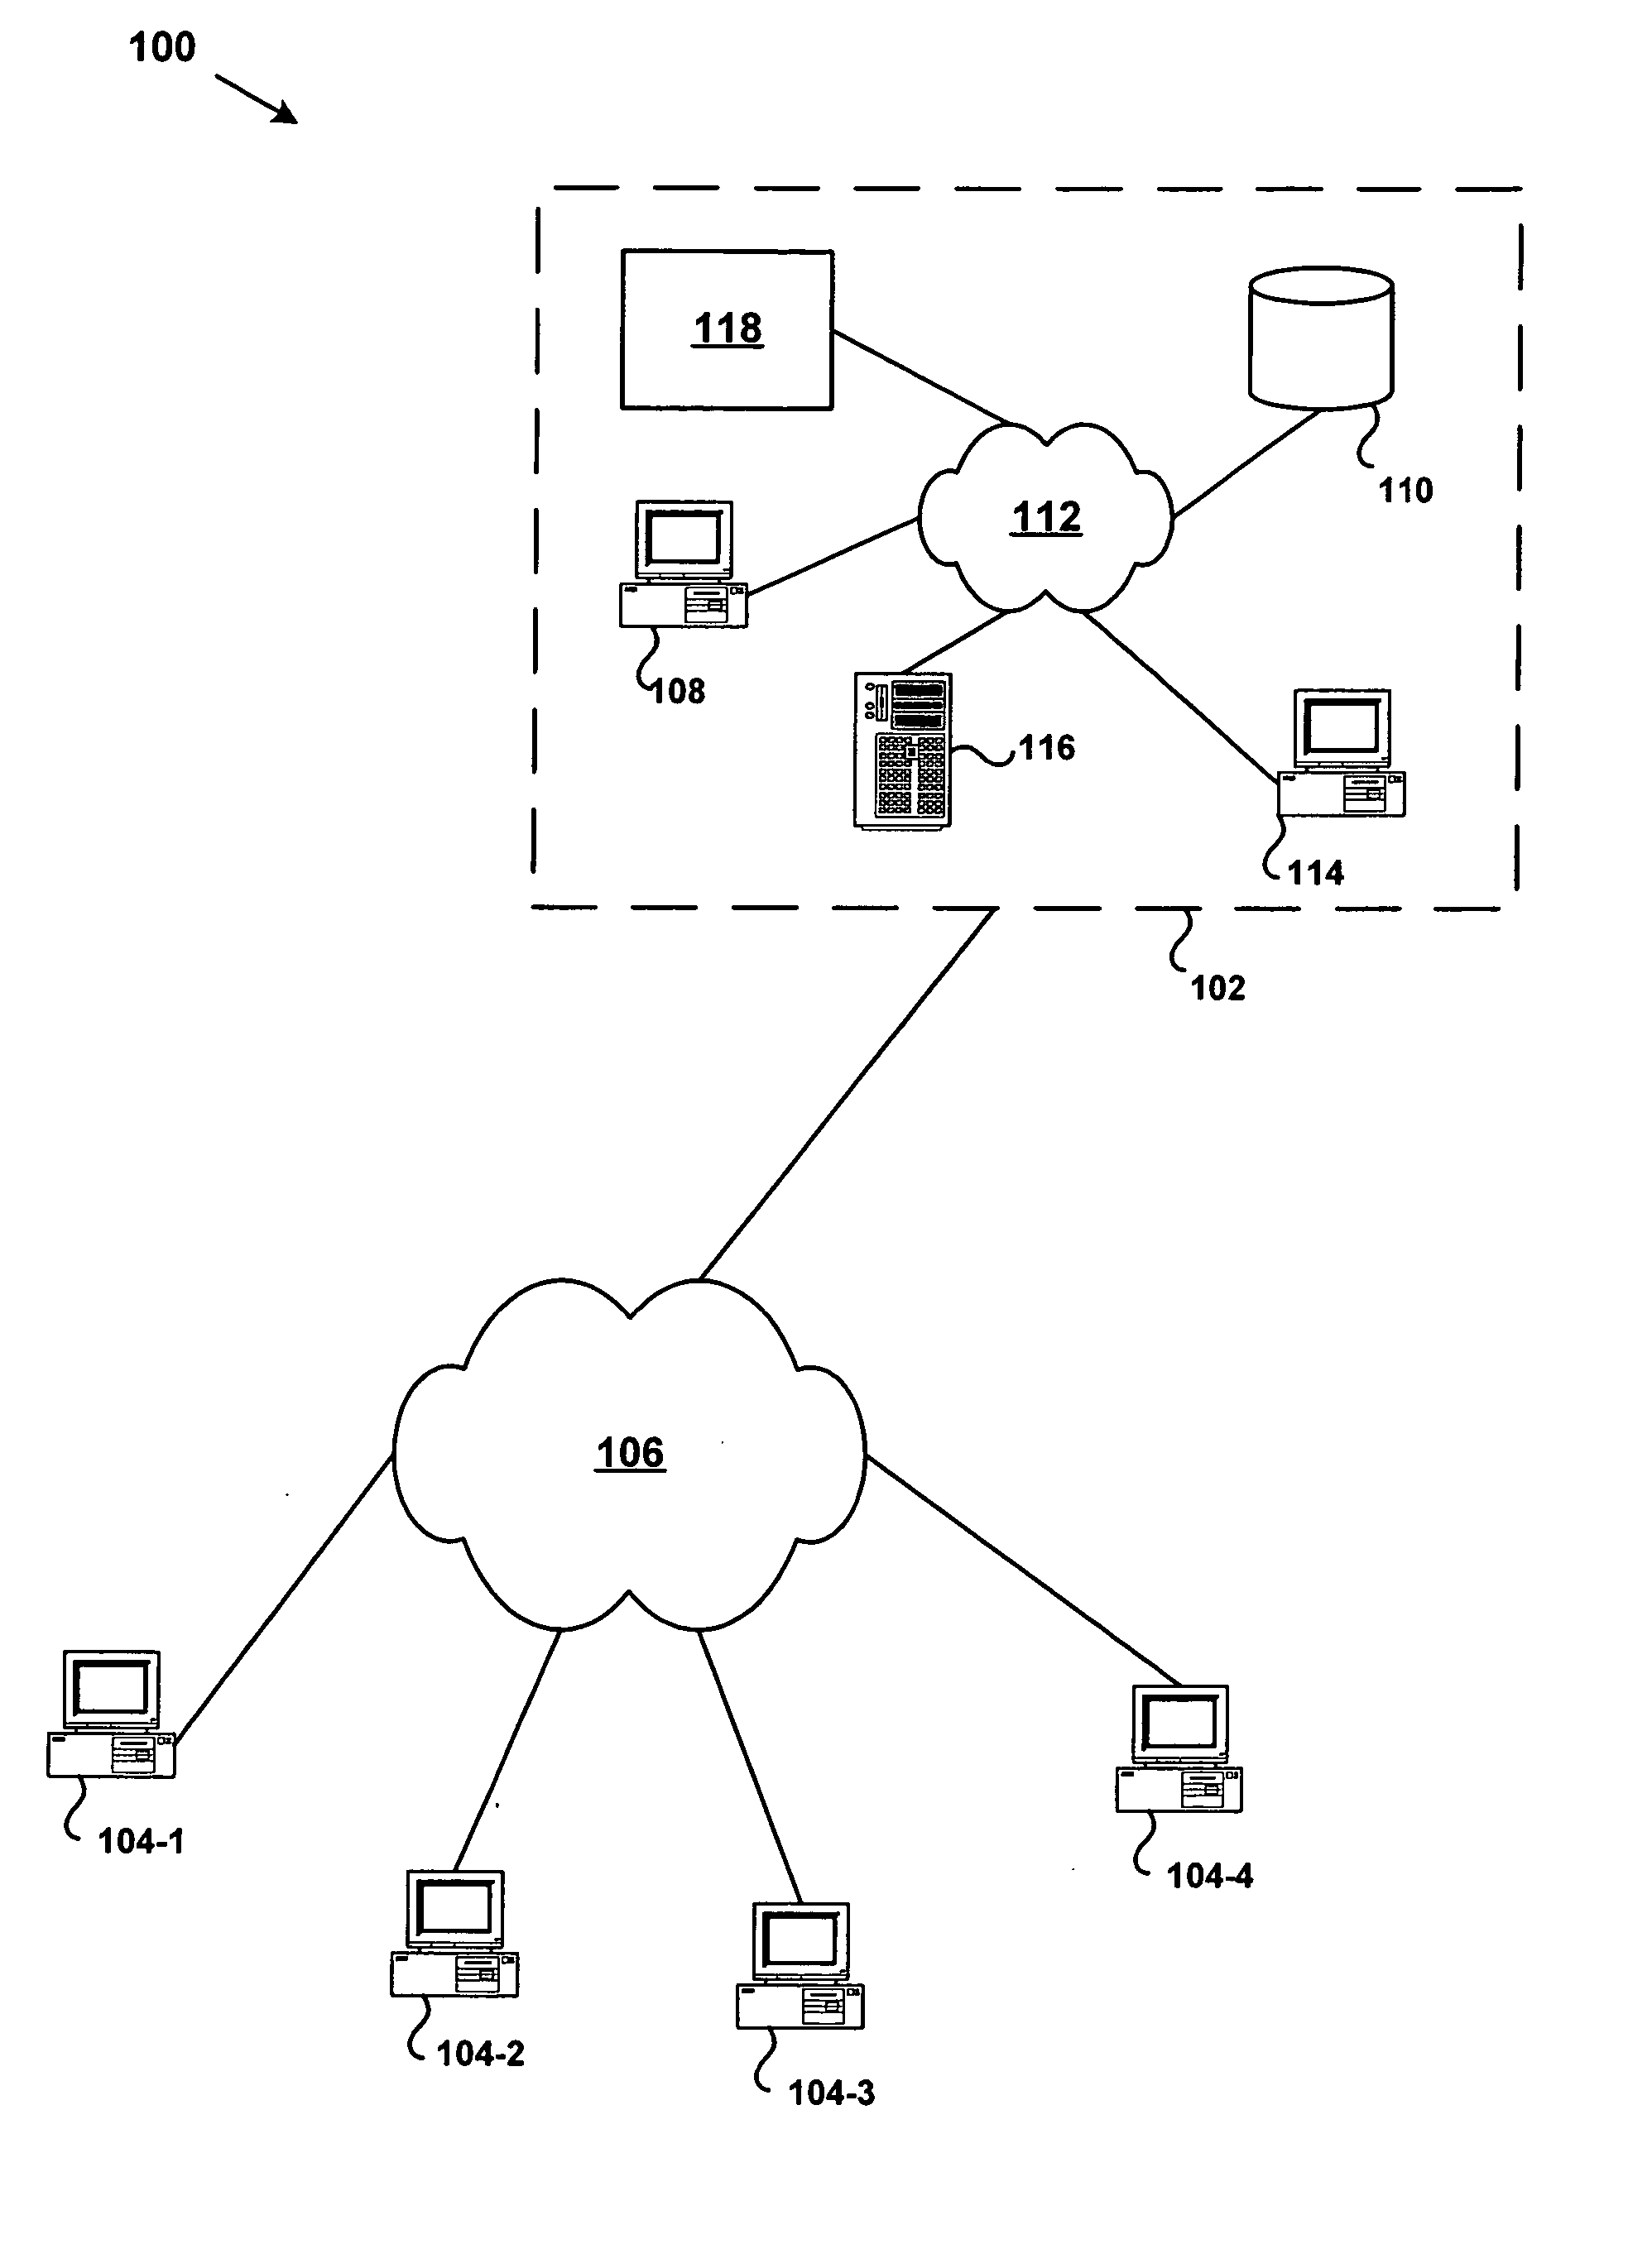 Confidence-based conversion of language to data systems and methods